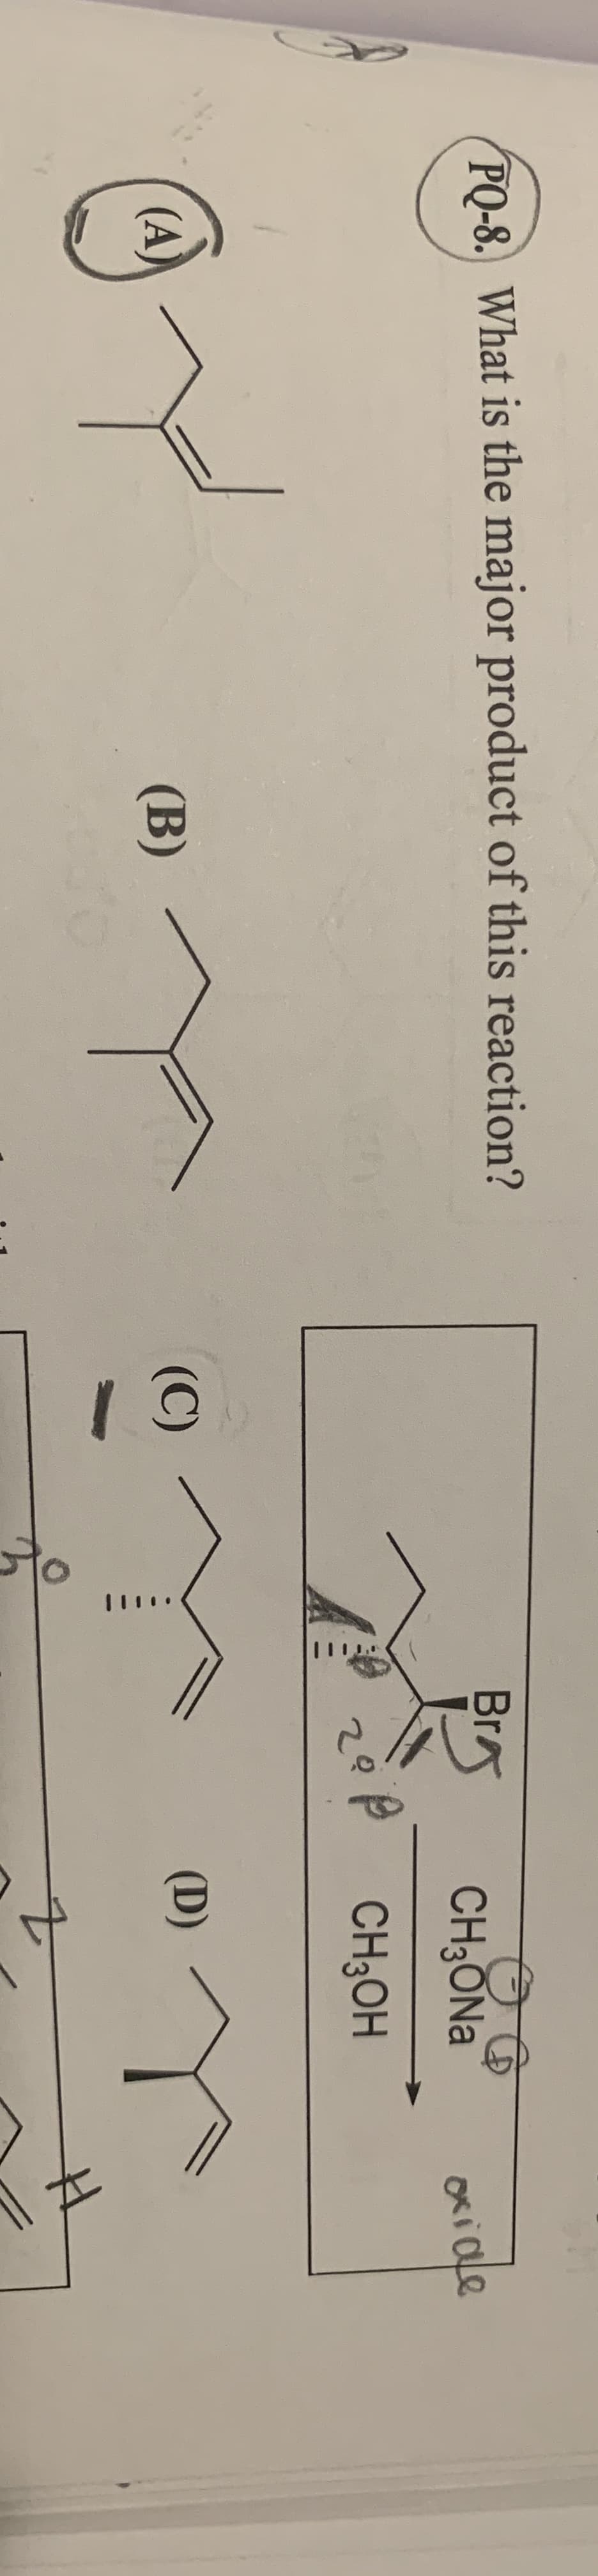 PO-8. What is the major product of this reaction?
Br
CH3ONA
xiale
CH3OH
(A)
(B)
(C)
(D)
